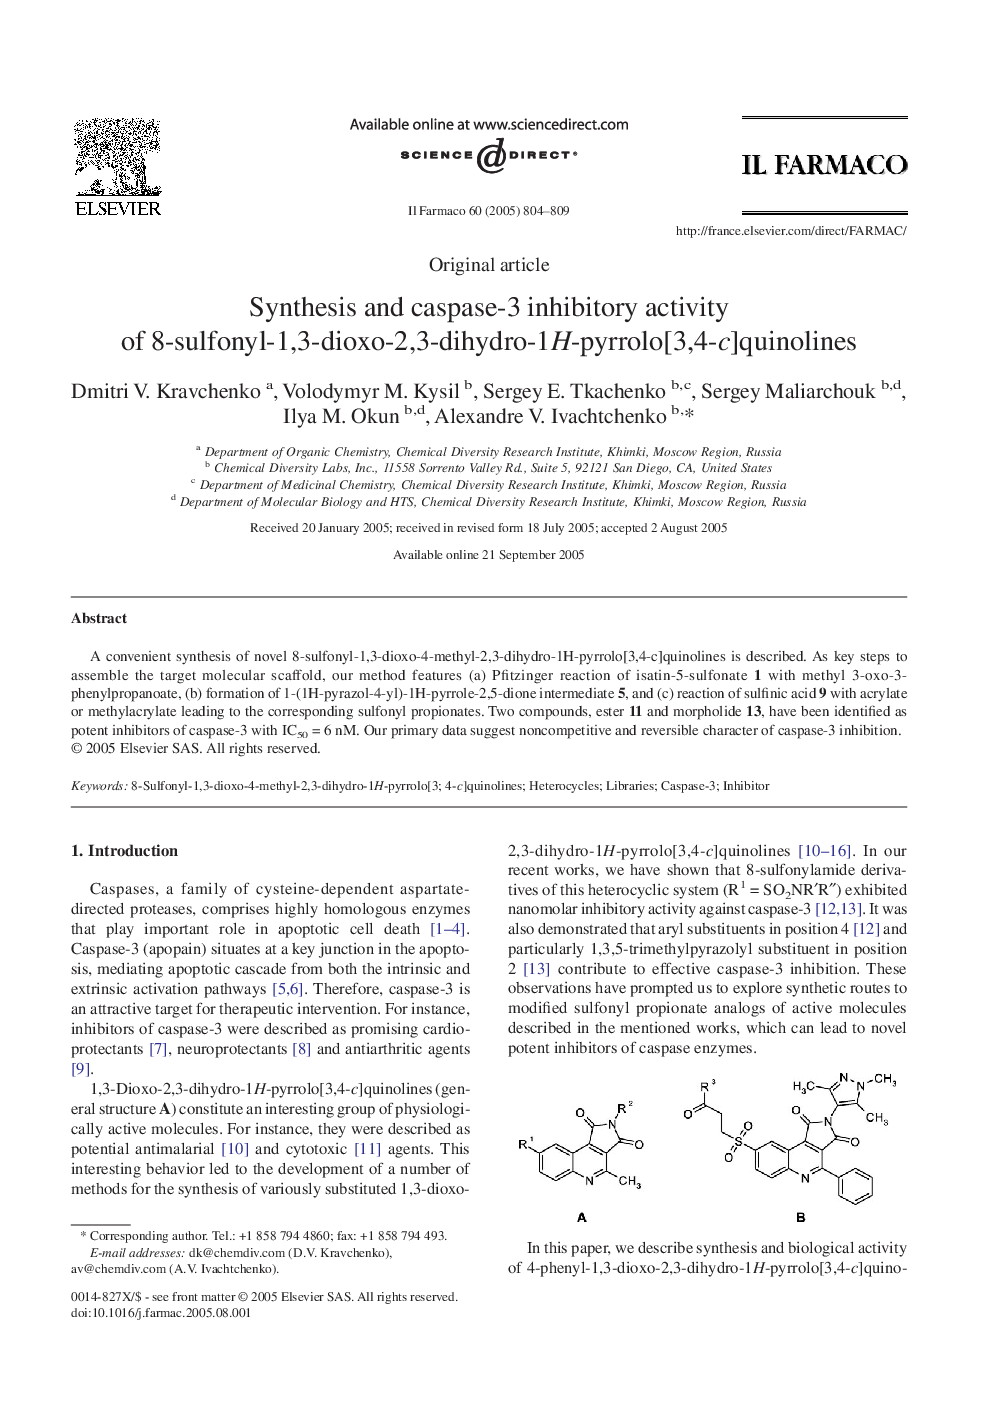 Synthesis and caspase-3 inhibitory activity of 8-sulfonyl-1,3-dioxo-2,3-dihydro-1H-pyrrolo[3,4-c]quinolines